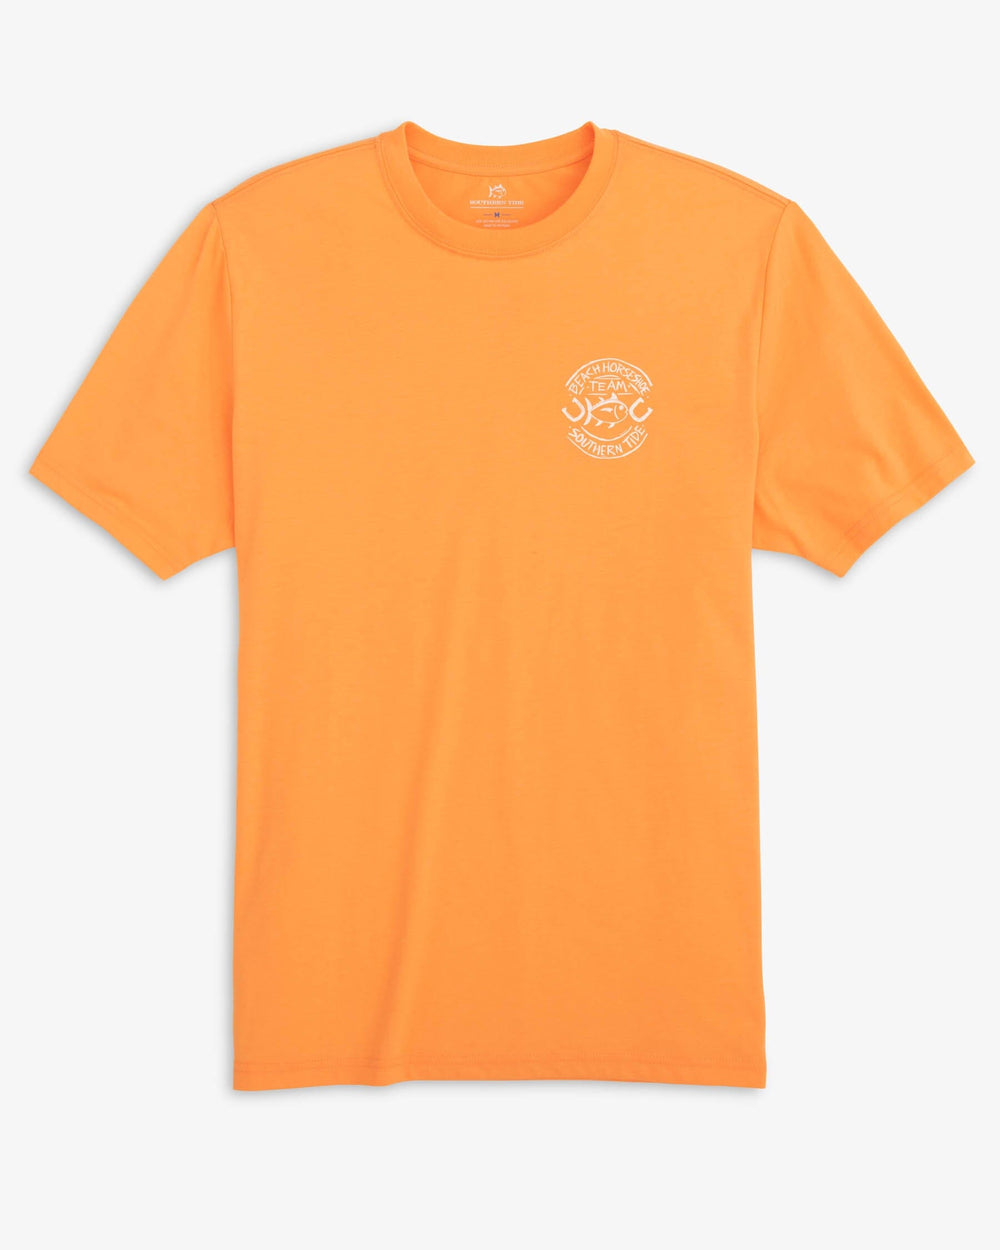 The front view of the Southern Tide Dead Ringer T-Shirt by Southern Tide - Horizon